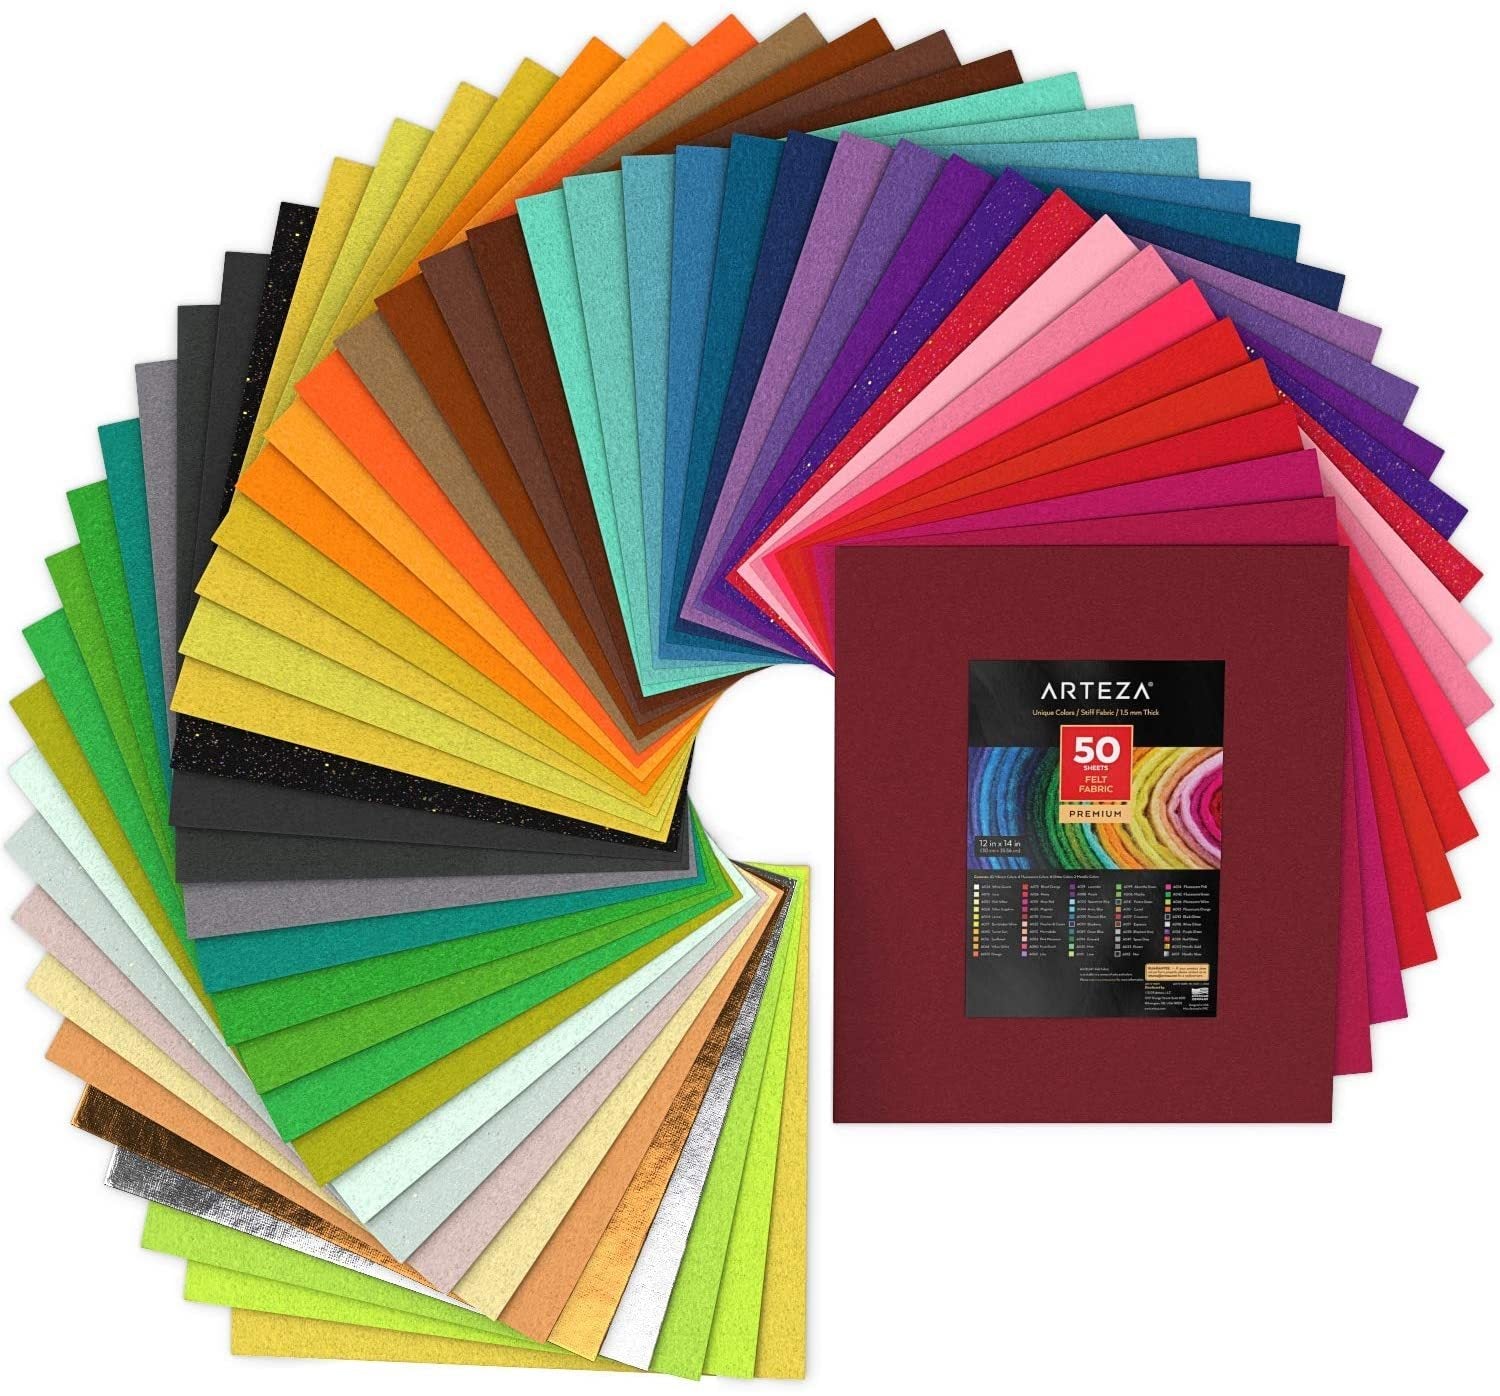 Orchip Stiff Felt Fabric, Assorted Colors, 4 inchx6 inch Sheets - 40 Pack, Size: 10